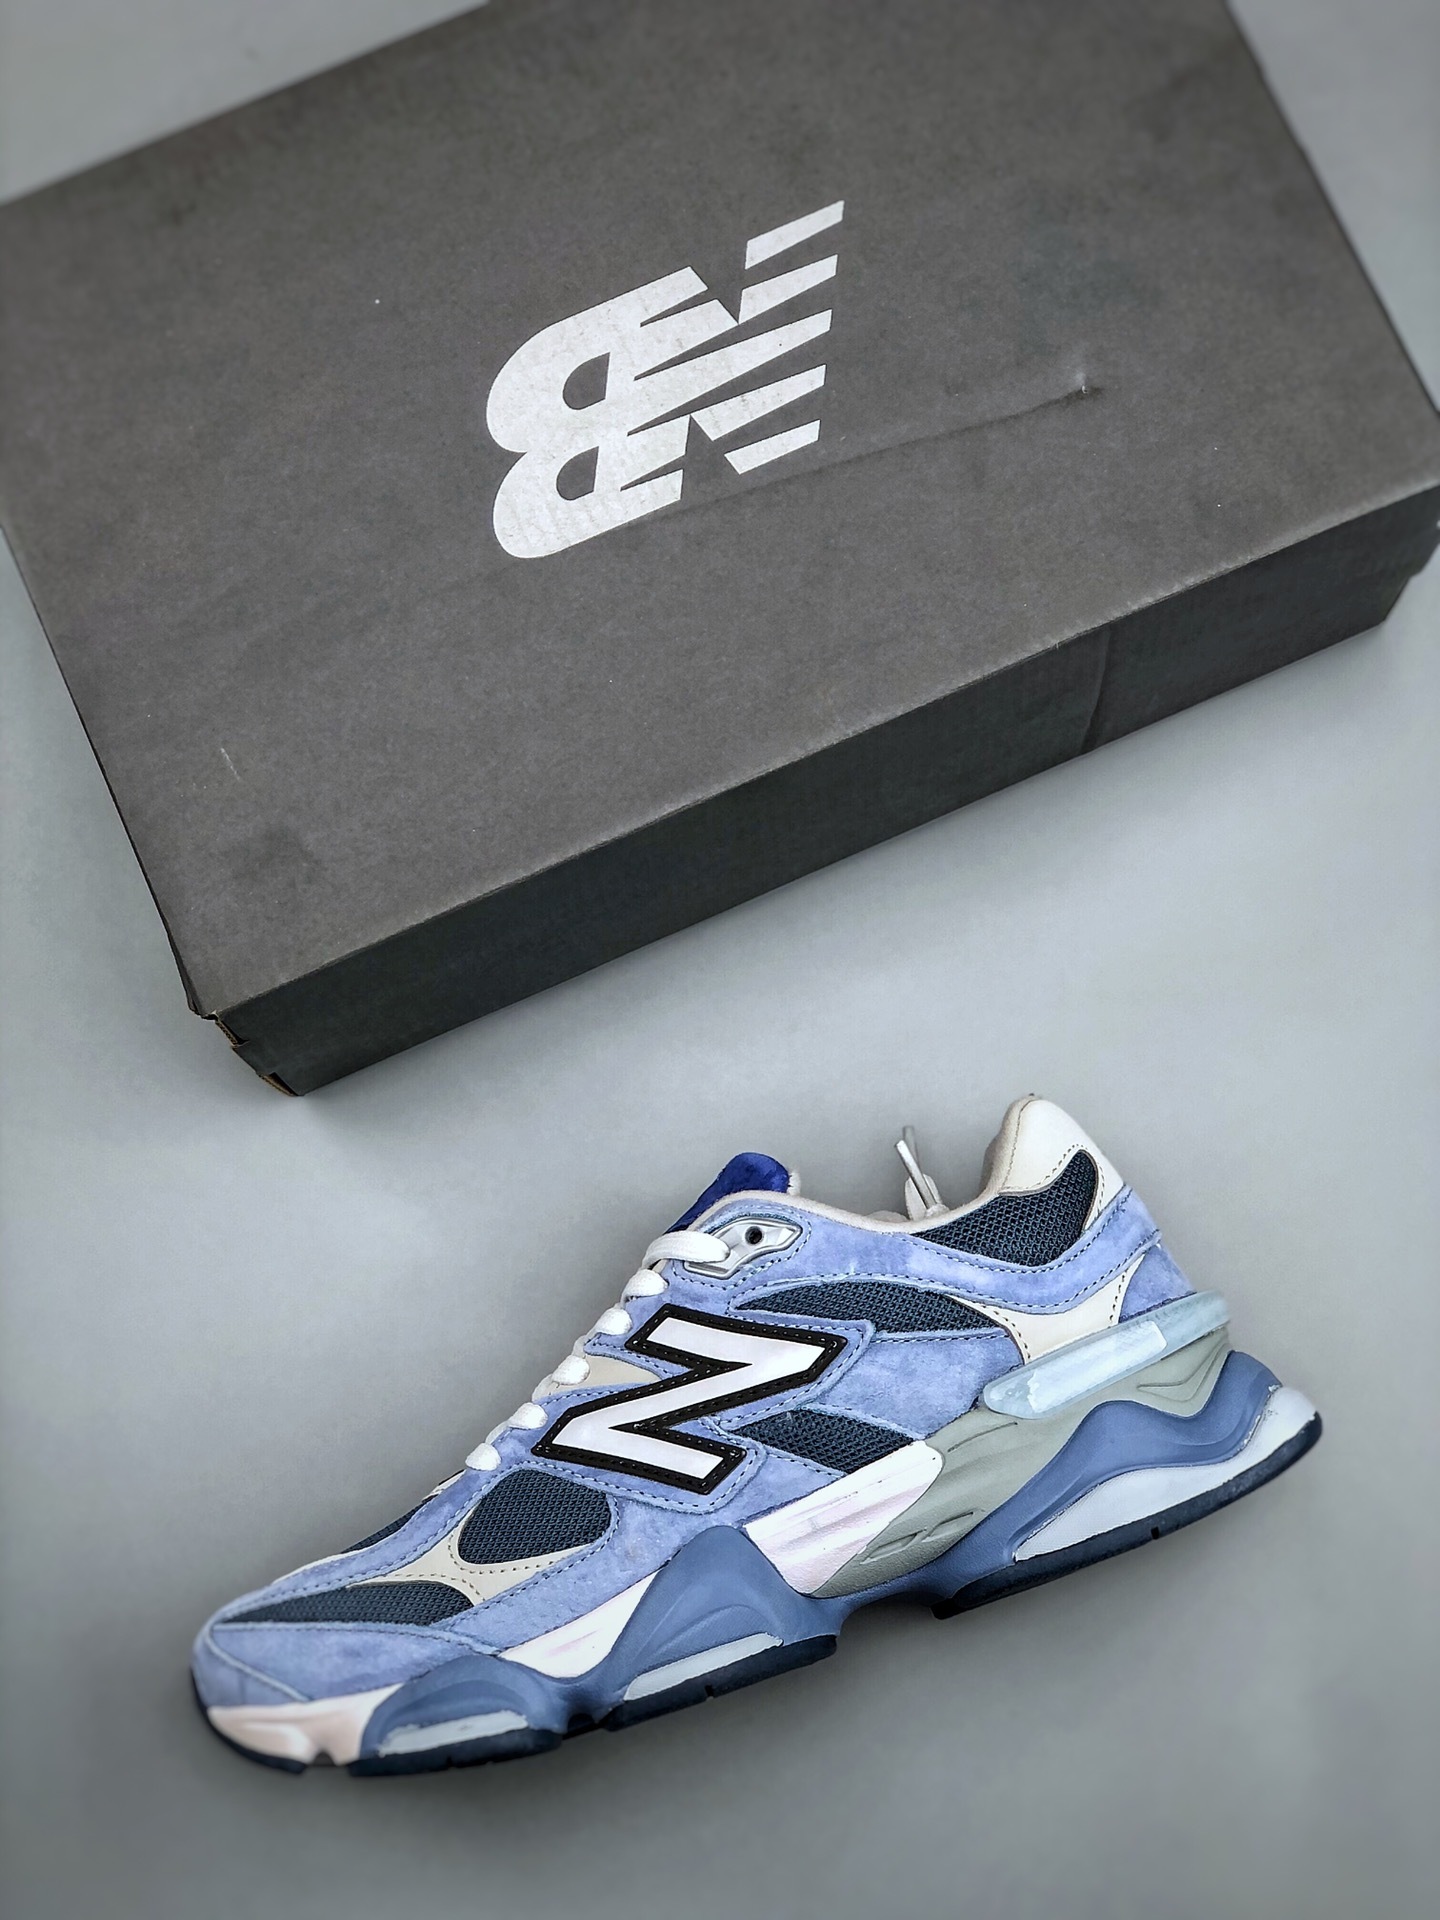 NB Joe Freshgoods x New Balance NB9060.  Online purchase of sports shoes with suitable prices NB Joe Freshgoods x New Balance NB9060.  Online purchase of sports shoes with suitable prices 30,New Balance NB9060,Sports shoes,NB shoes